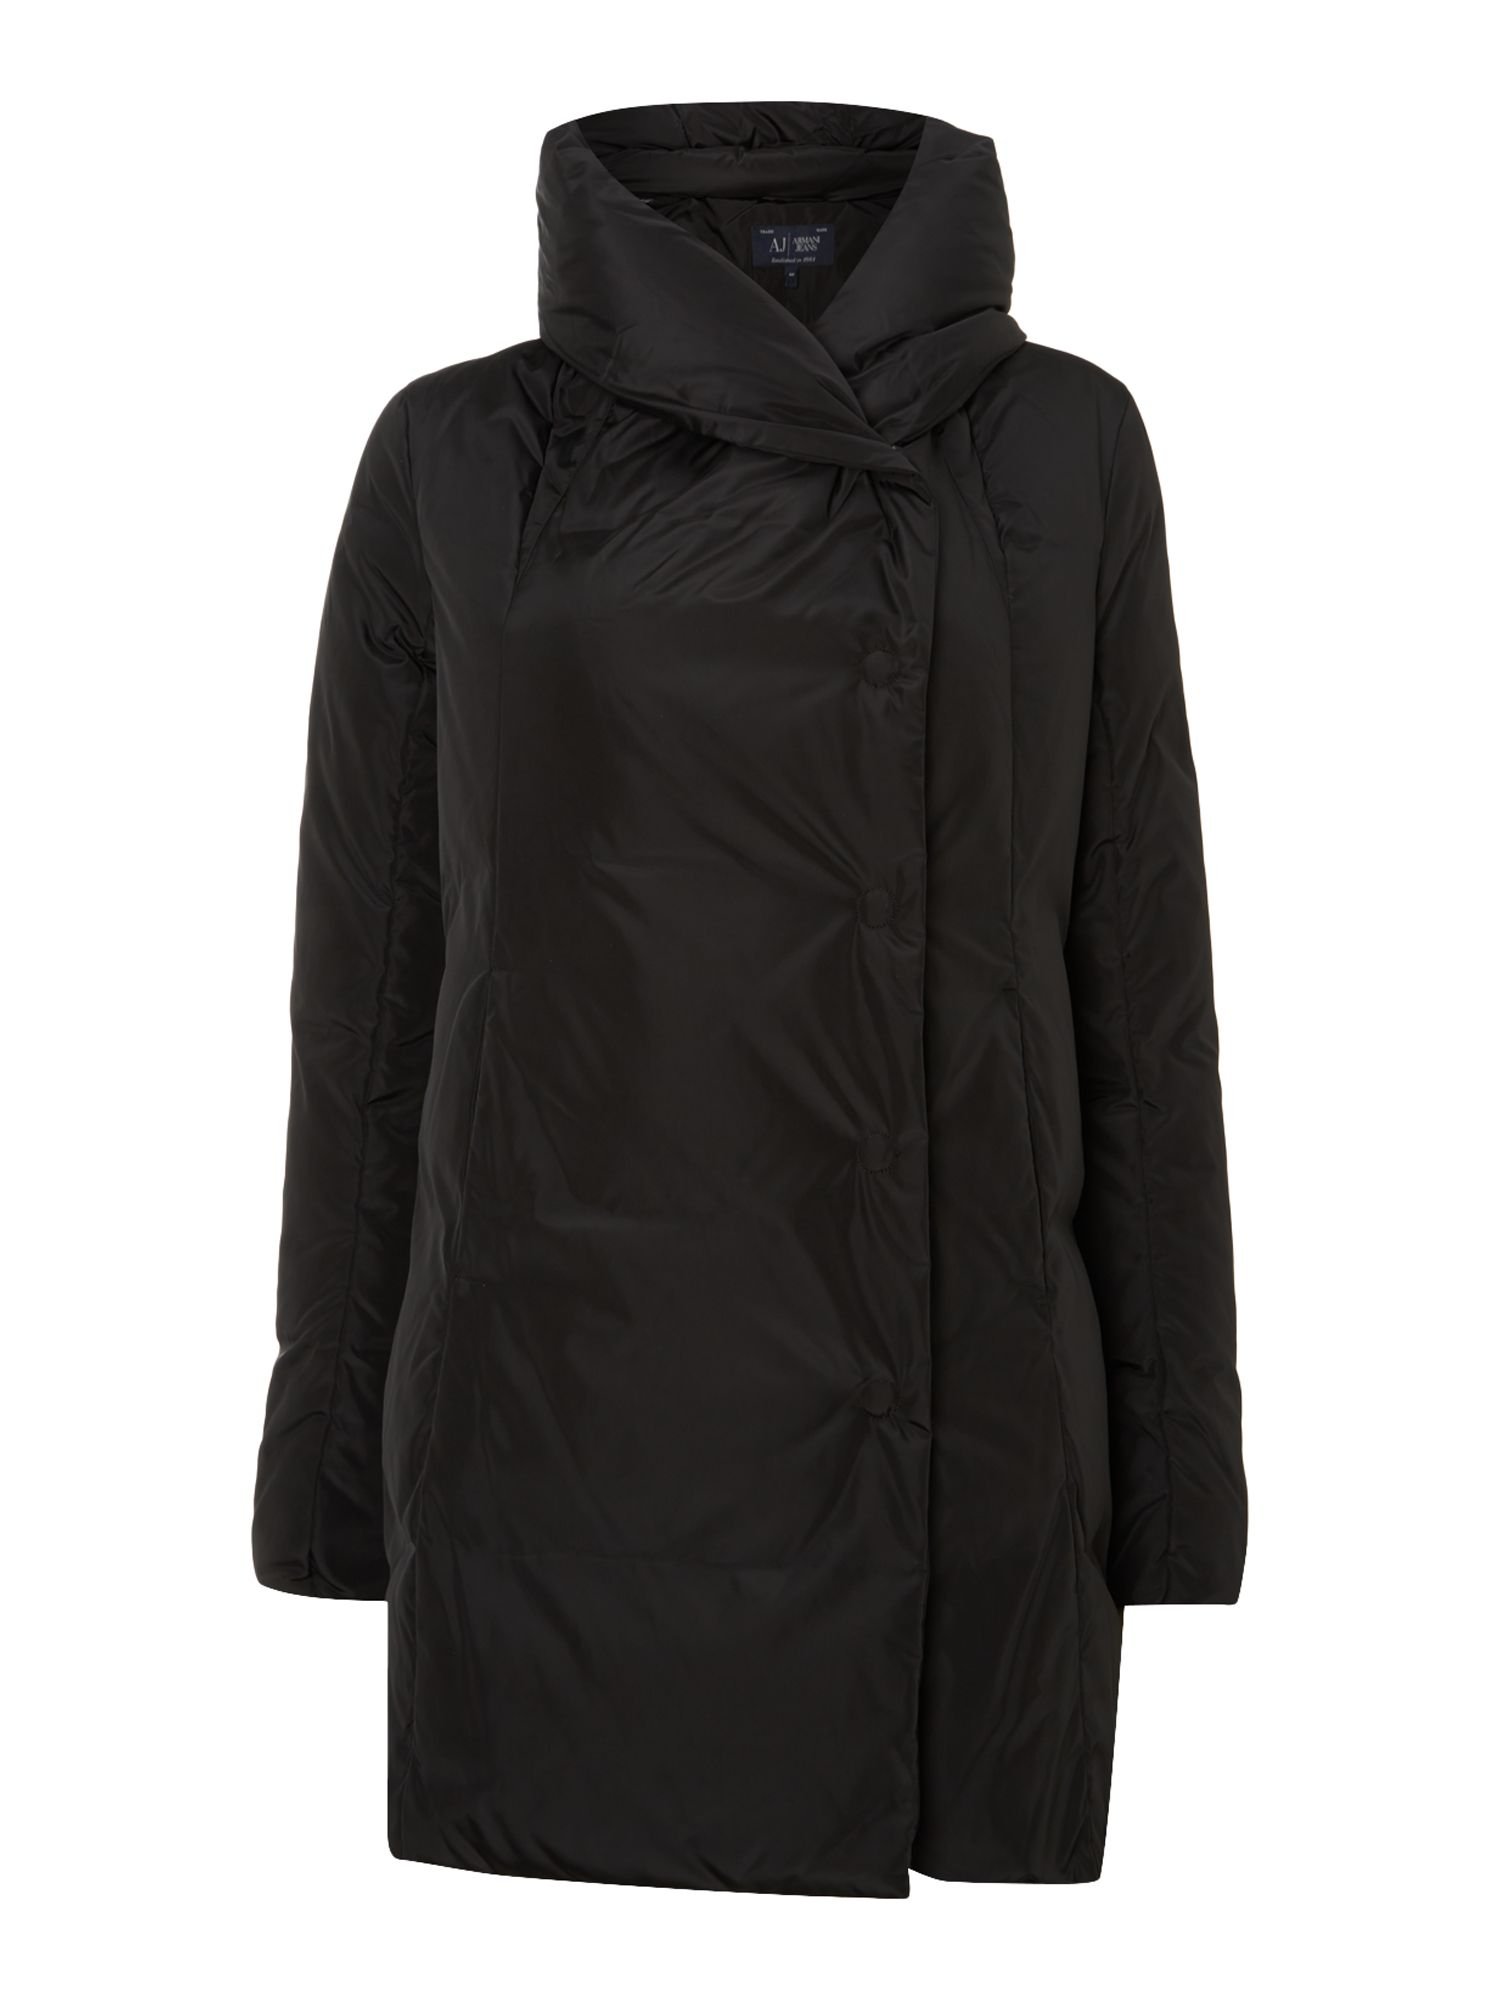 Armani Jeans Long Padded Coat with Big Collar in Black | Lyst